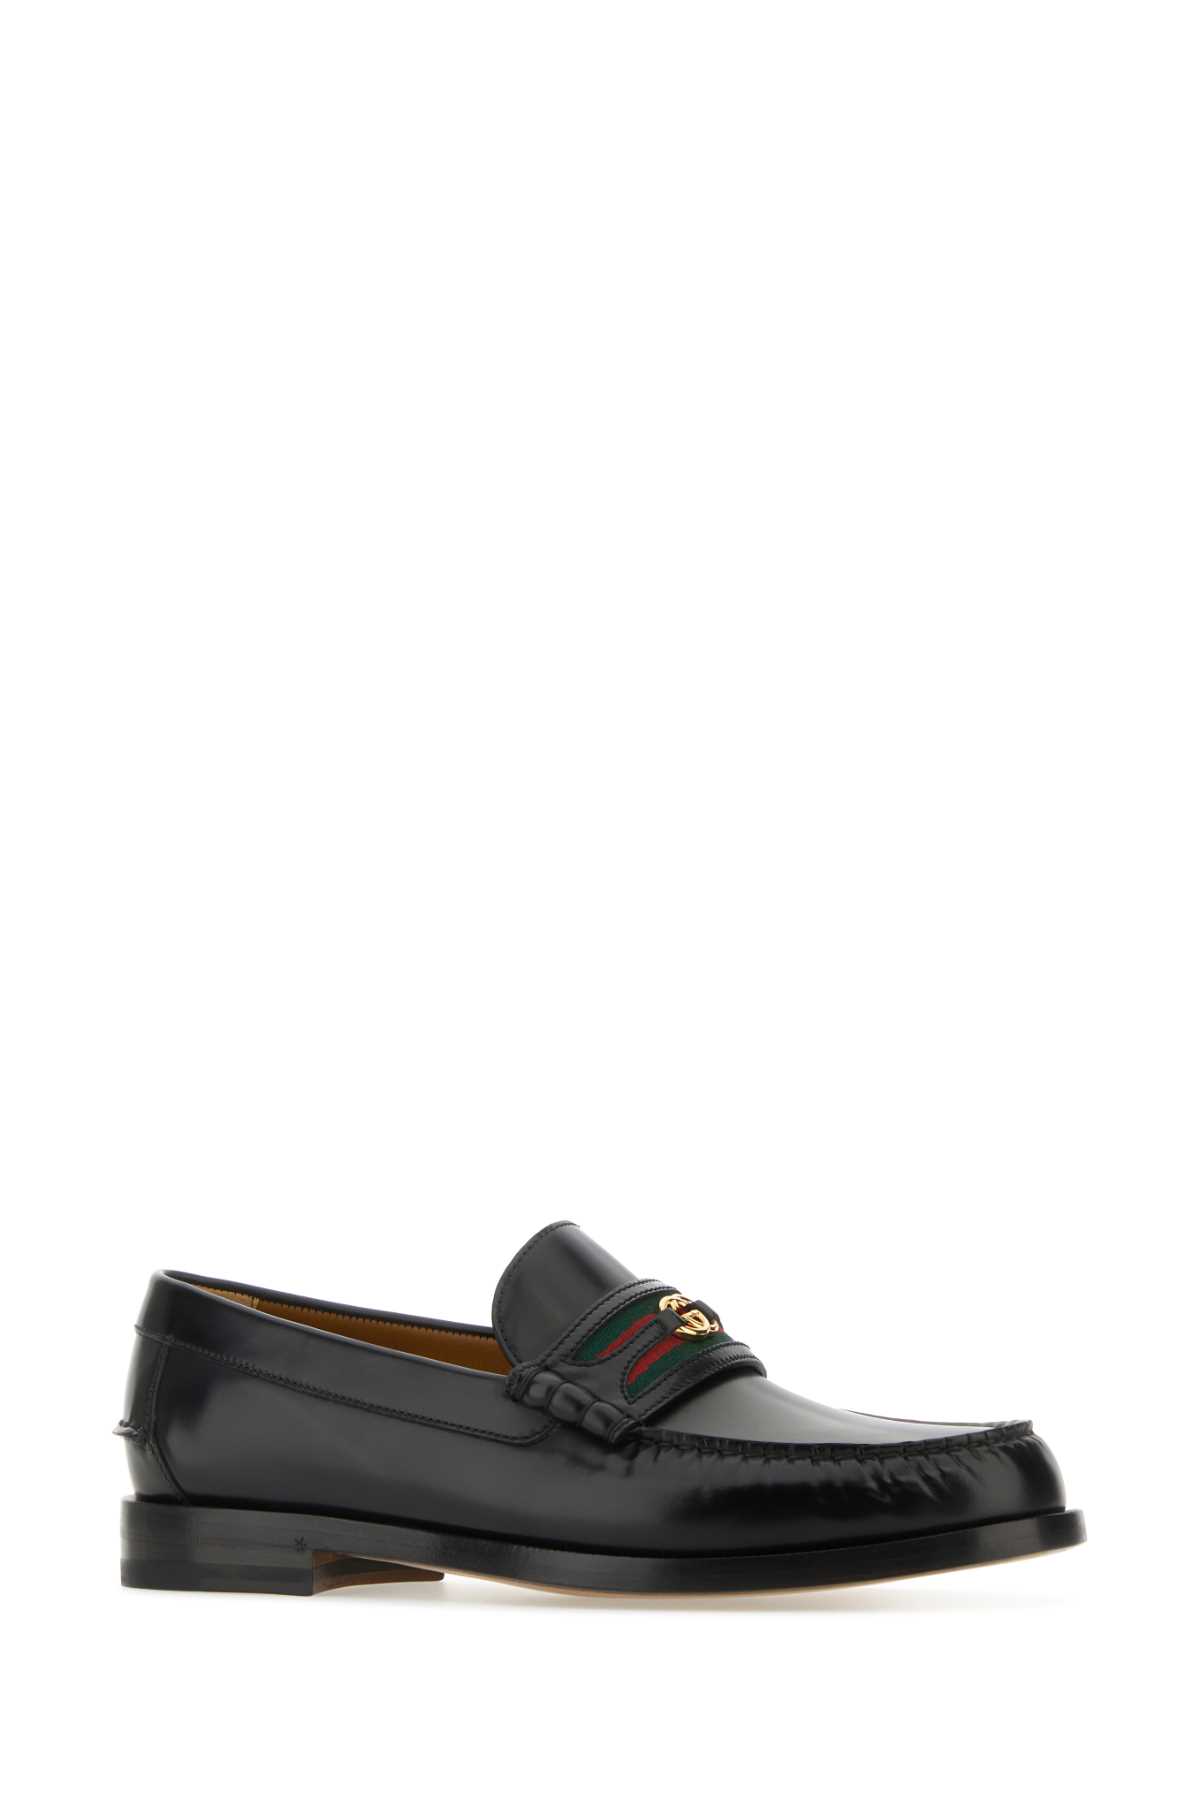 Gucci Black Leather 1953 Loafers